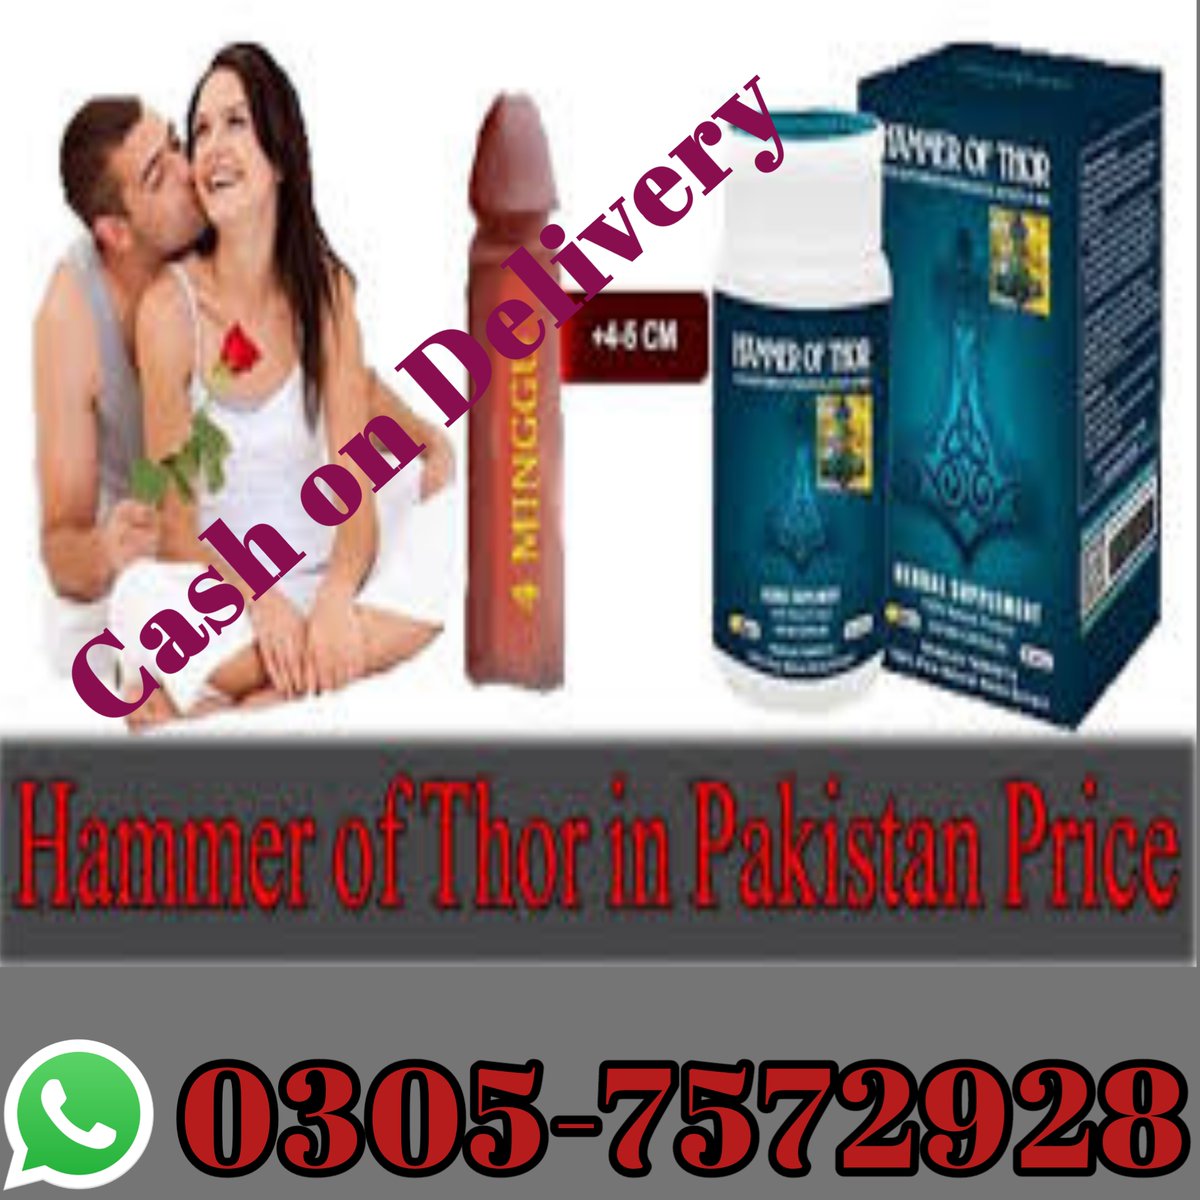 Hammer Of Thor Original Price in Sagh Oder Now-03057572928 https://t.co/dUThB8o5fh